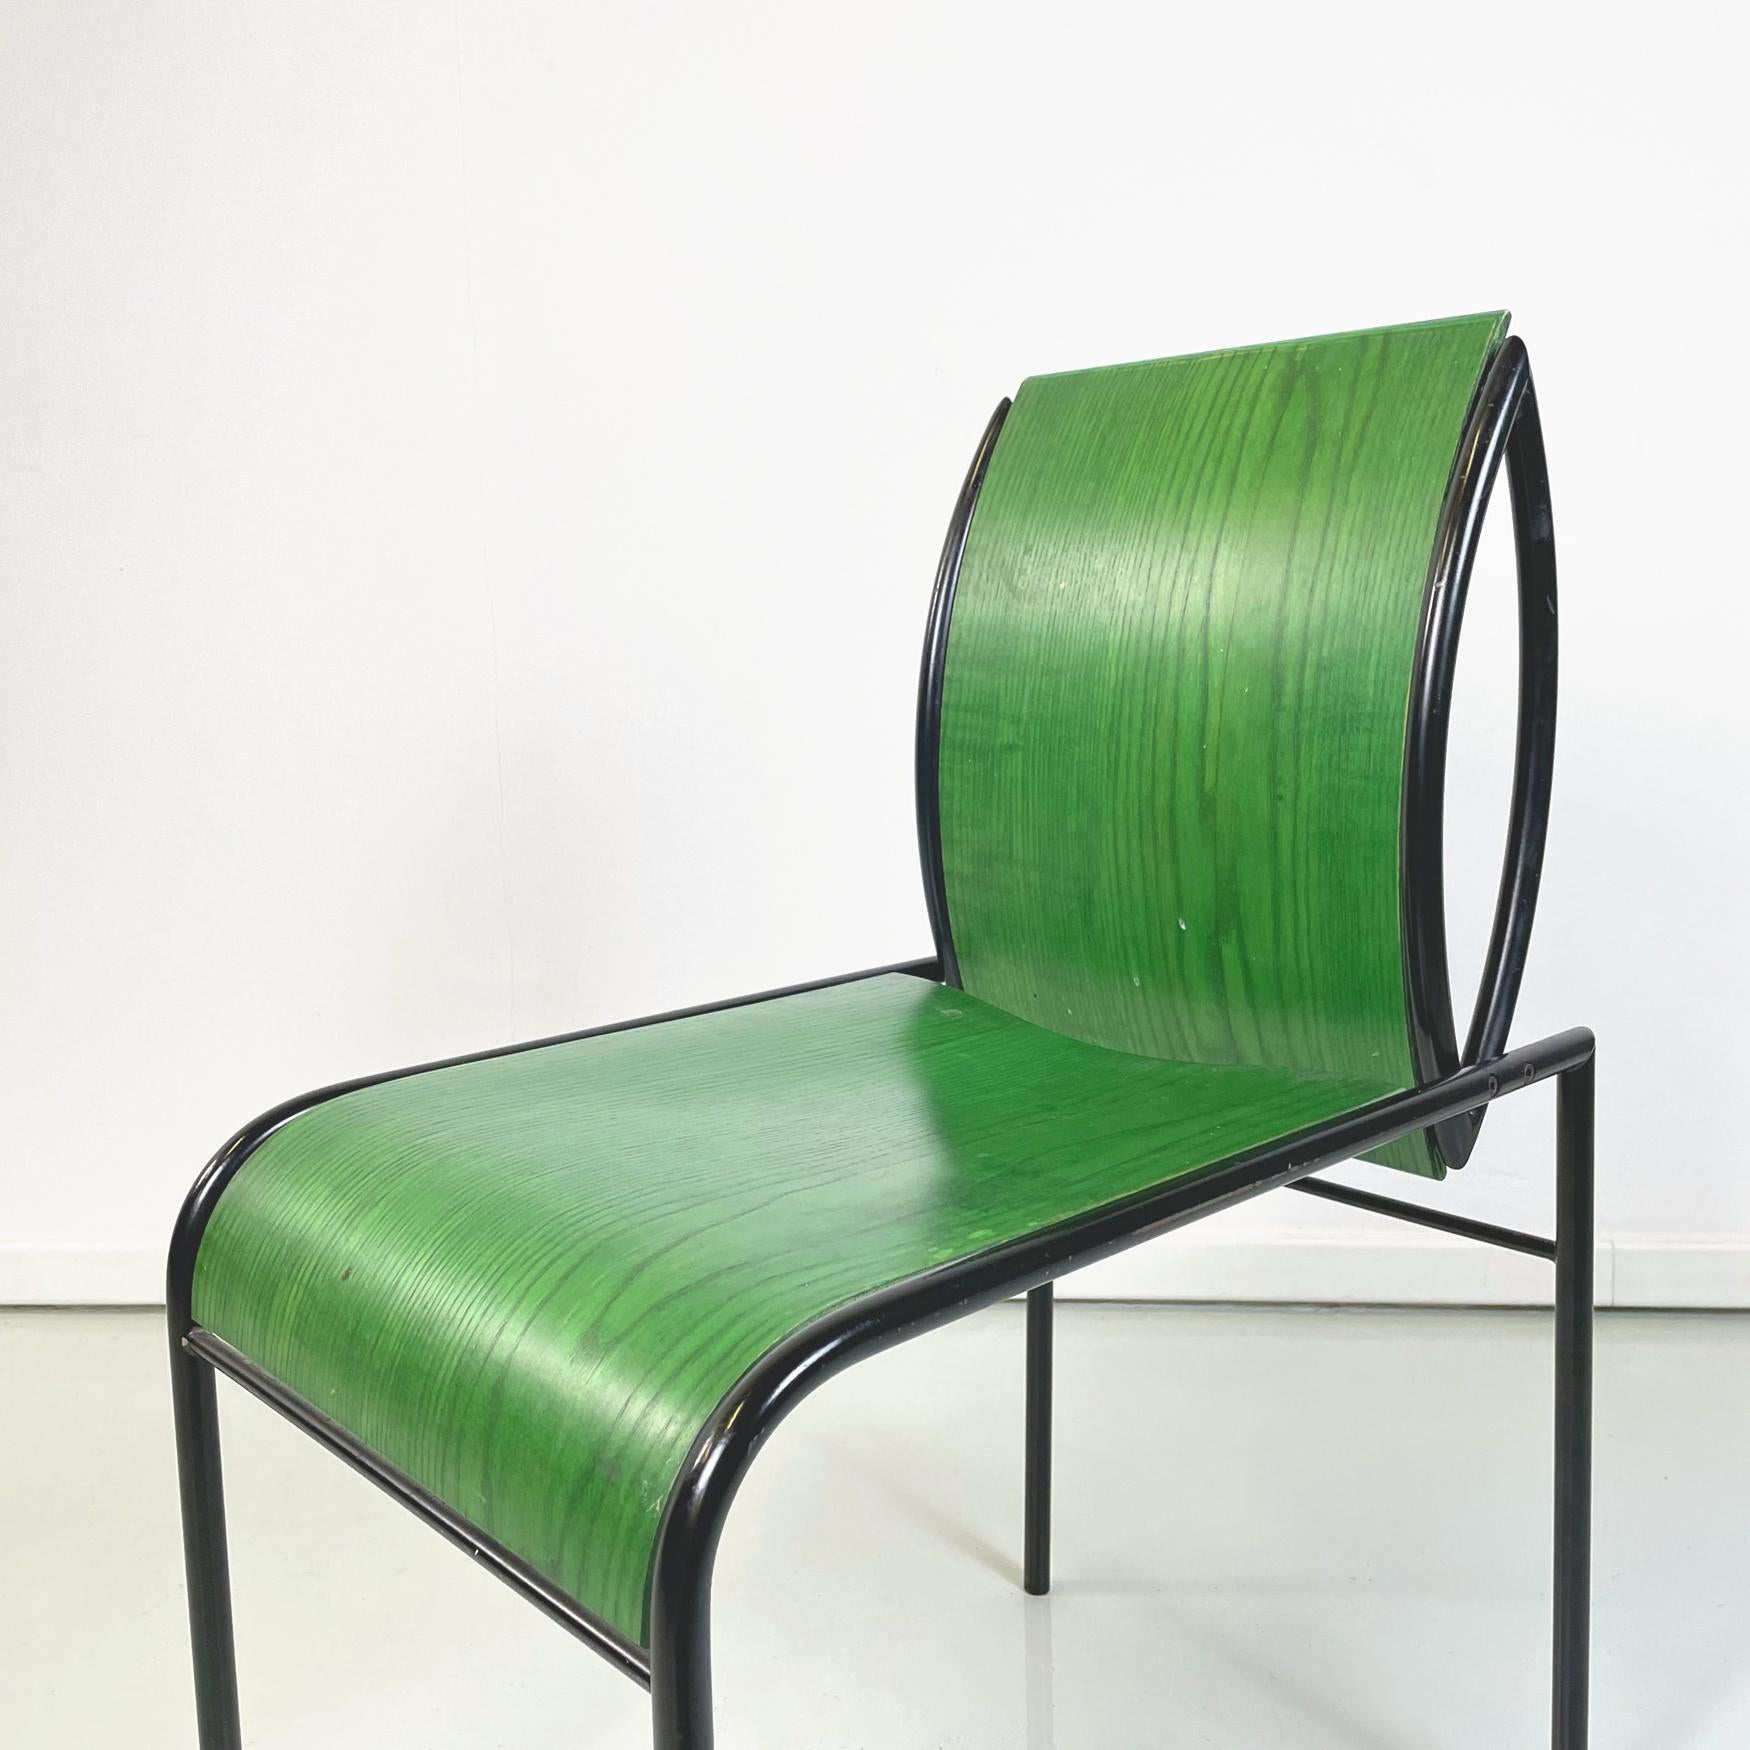 Italian modern Green wood black metal chair Kim by De Lucchi for Memphis, 1980s For Sale 1